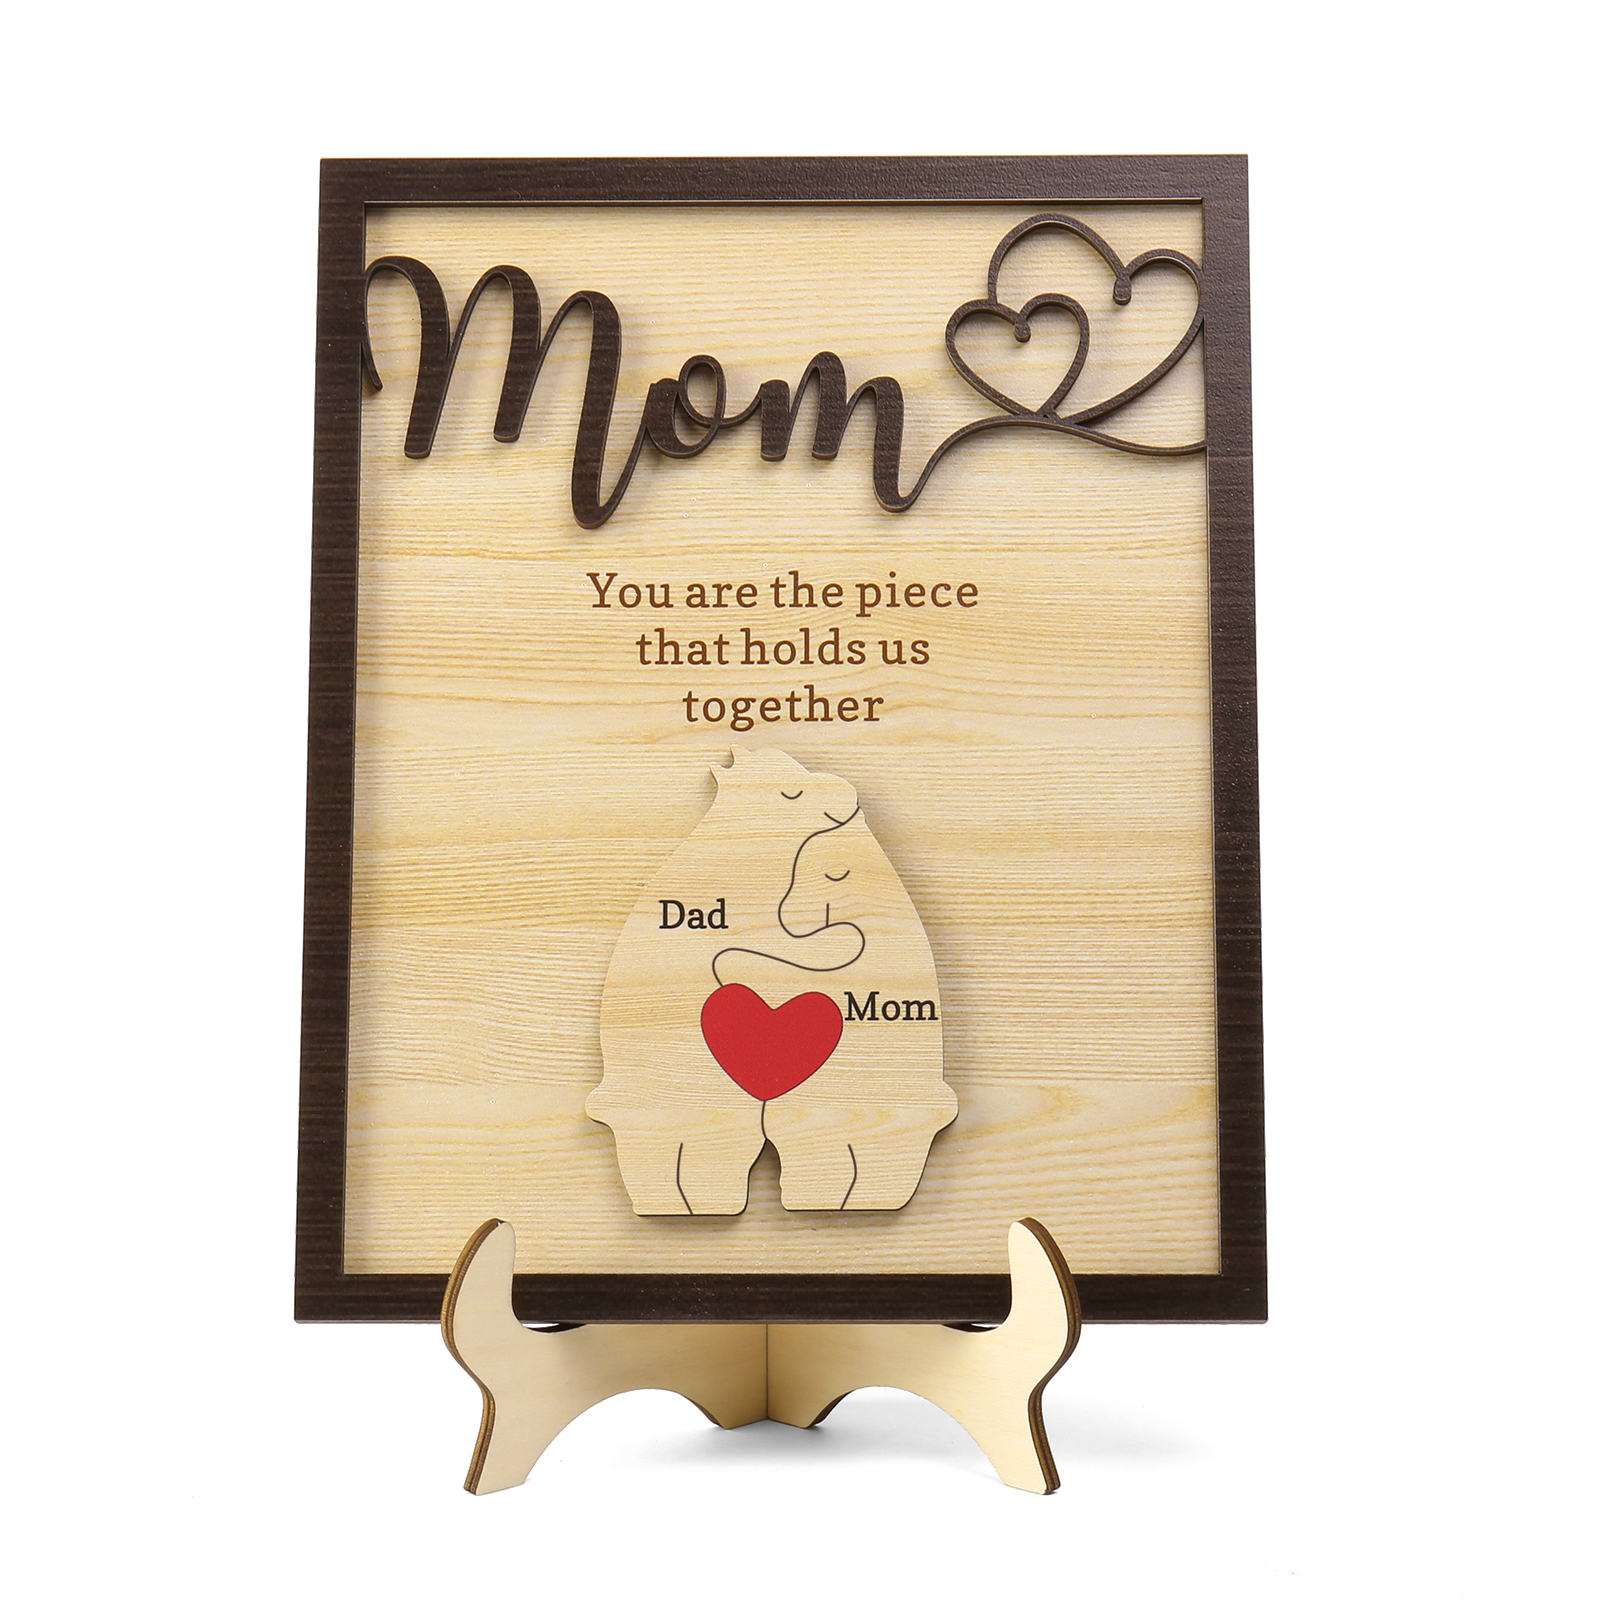 3 Names - Personalized Home Frame Wooden Ornaments Cute Bear Style Cus